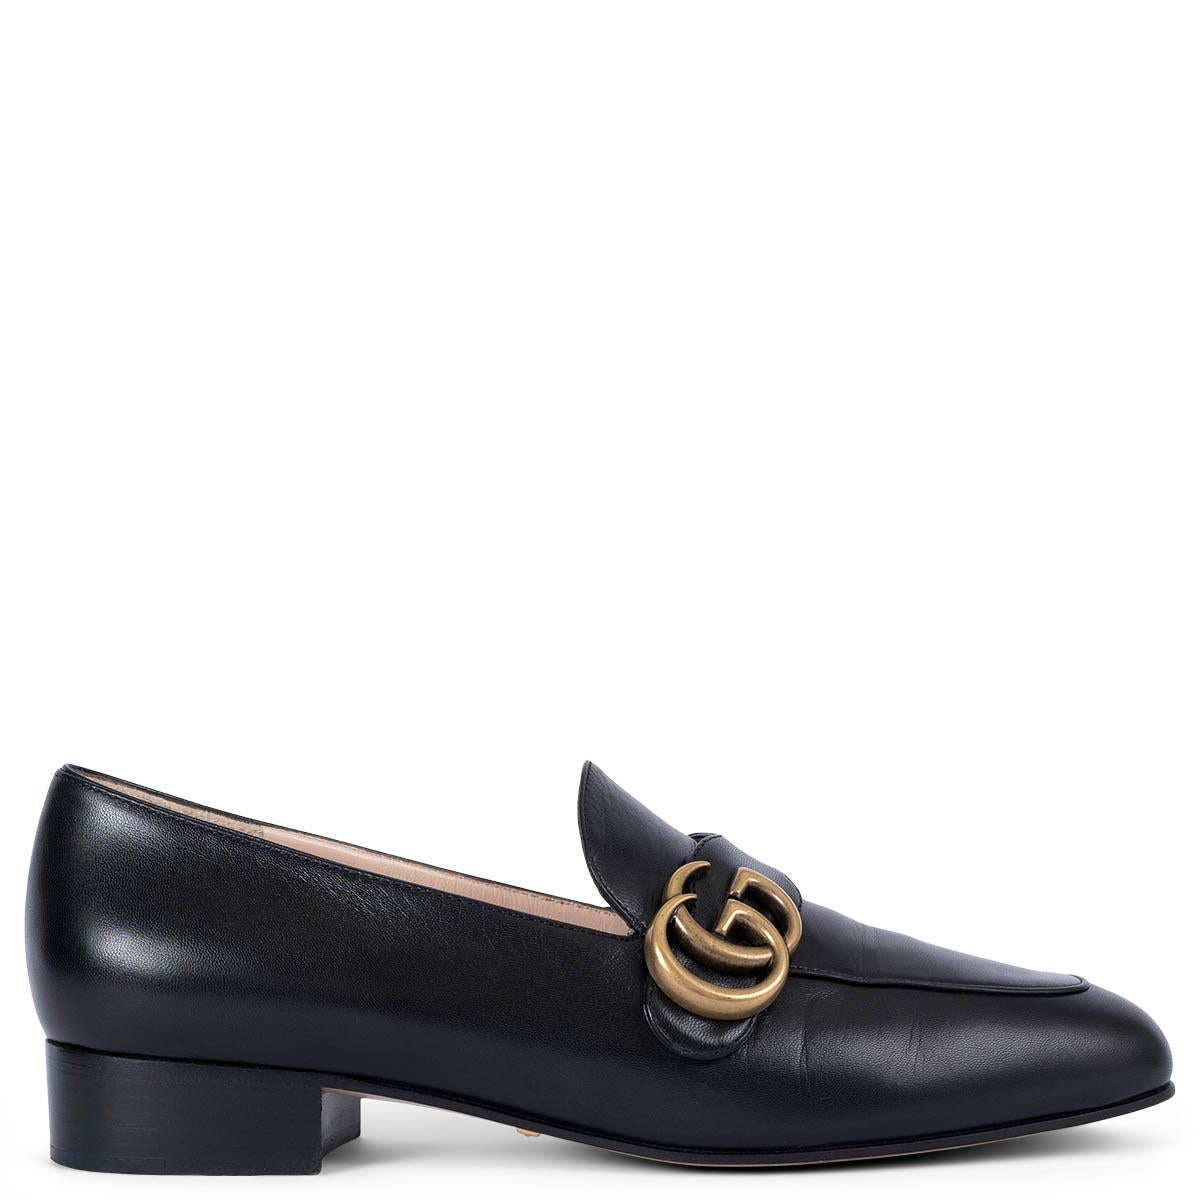 GUCCI black leather GG MARMONT Loafers Shoes 38 For Sale